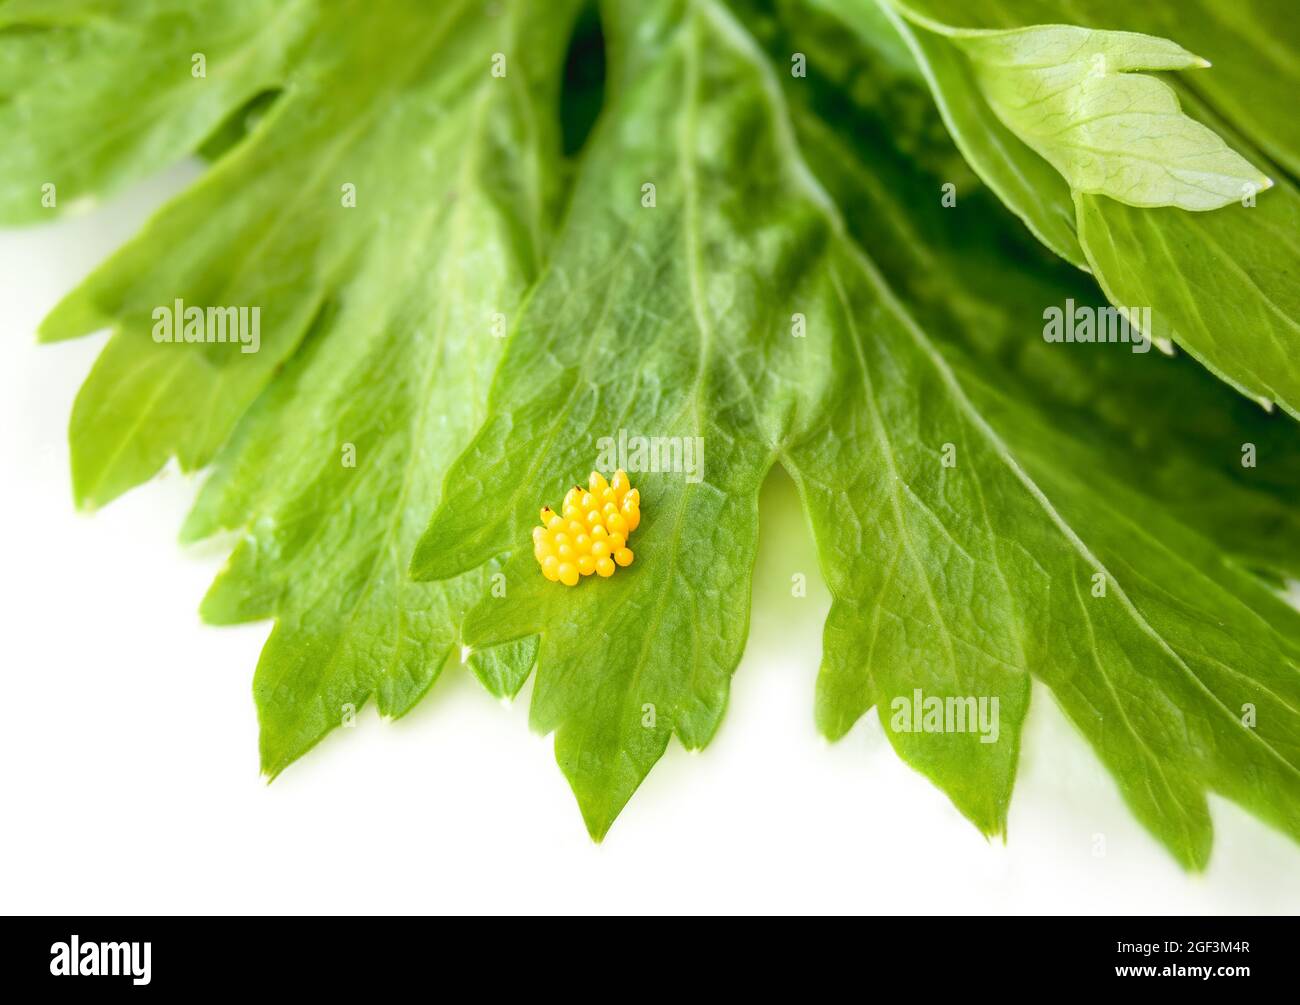 Ladybug egg cluster on celery leaf, close-up. Group of yellow oval-shaped eggs. Also known as ladybird, lady beetle, lady clock and lady fly. Benefici Stock Photo